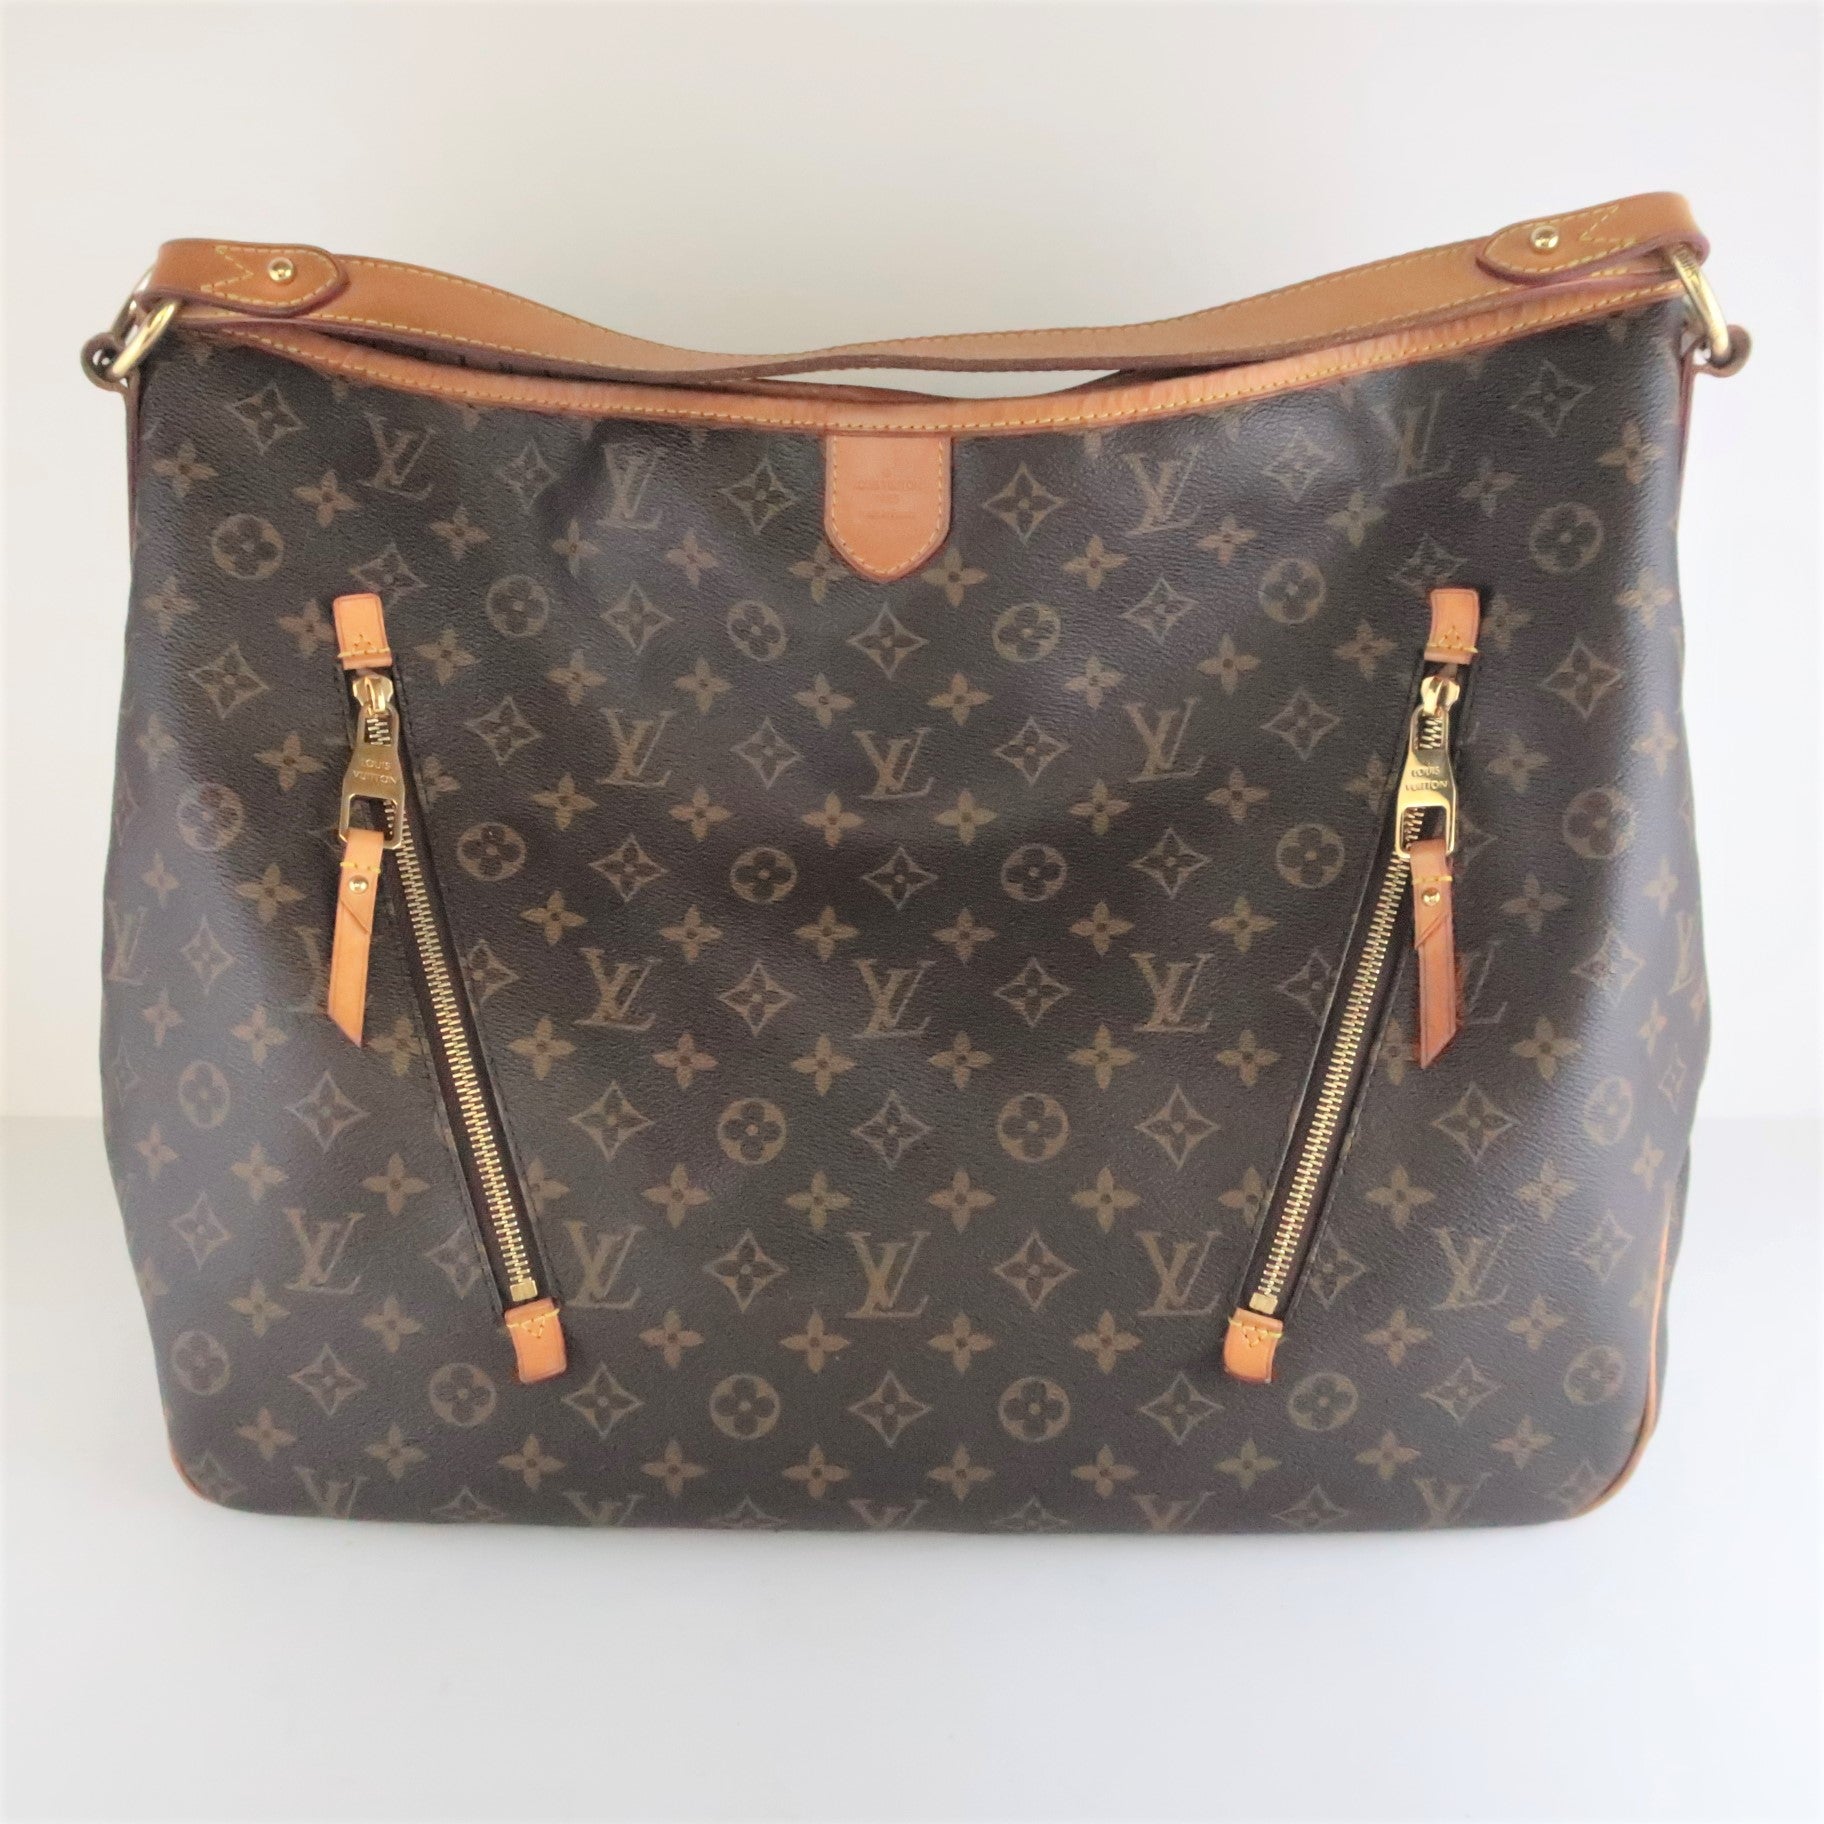 Louis vuitton large bag hi-res stock photography and images - Alamy